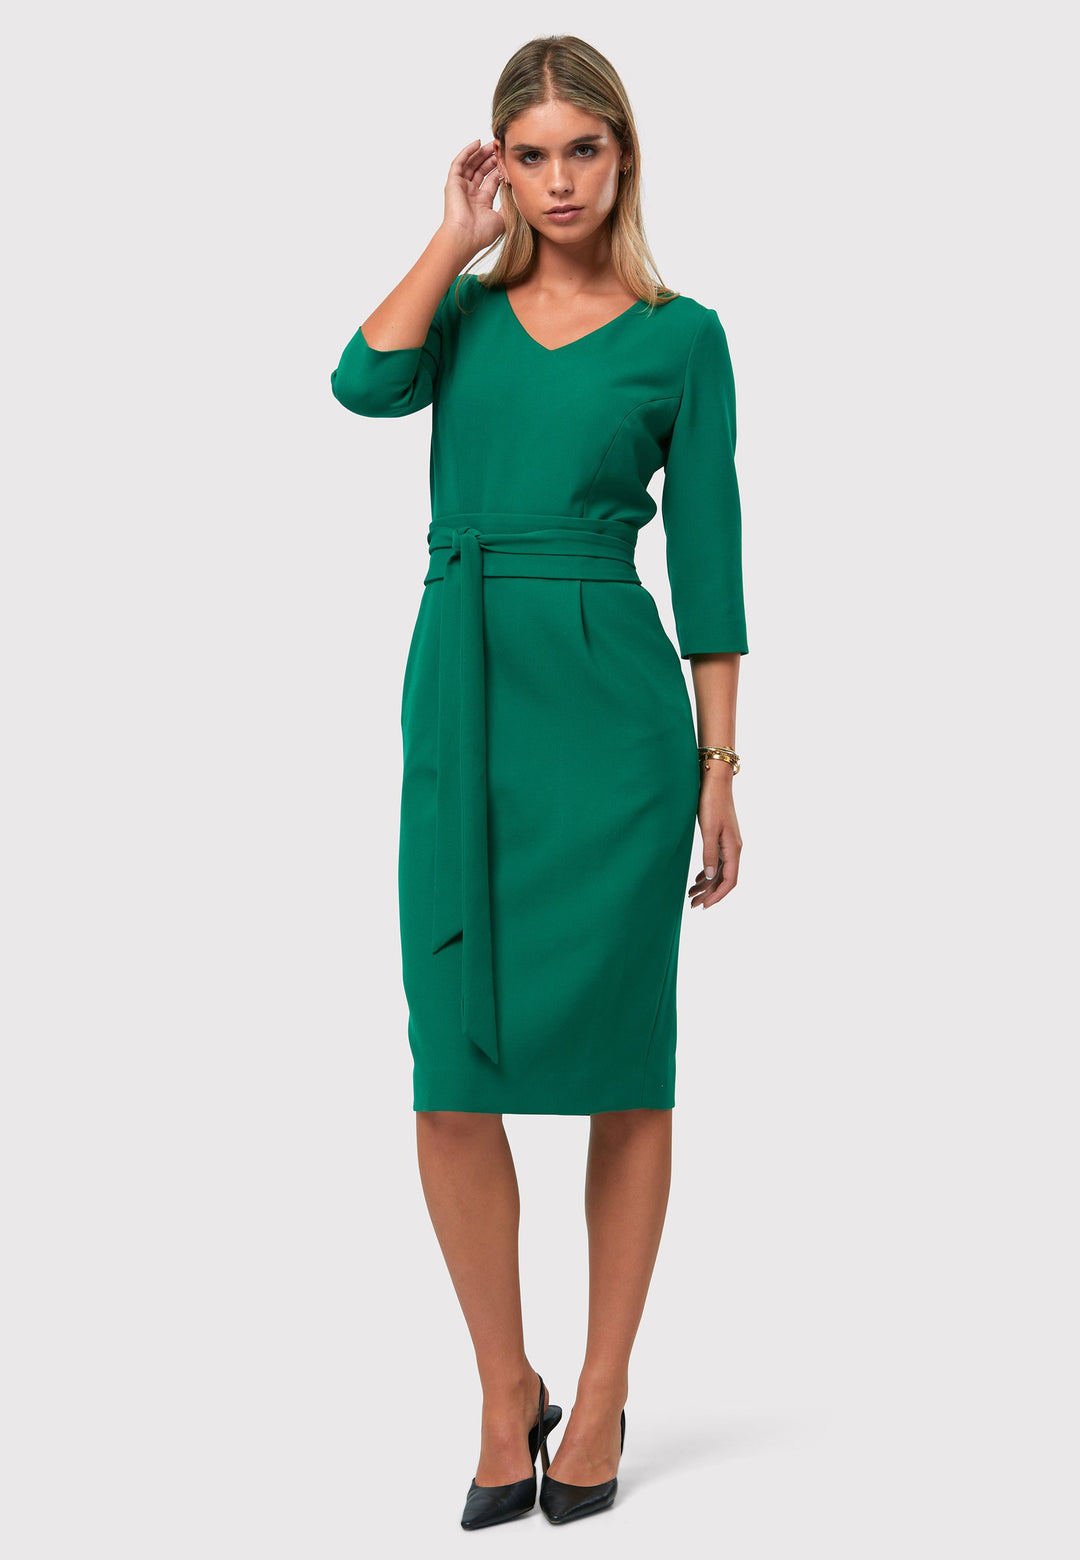 Introducing the Ophelia Dark Emerald Green Dress, a timeless and impeccably tailored silhouette. This expertly crafted dress features a form-flattering design with convenient pockets, a detachable belt, and a pencil skirt that falls to a chic mid-calf length. The sophisticated V-neckline adds an elegant touch to the overall look. Crafted from sustainably sourced fibers with a hint of stretch, this dress ensures both comfort and ease of movement. 